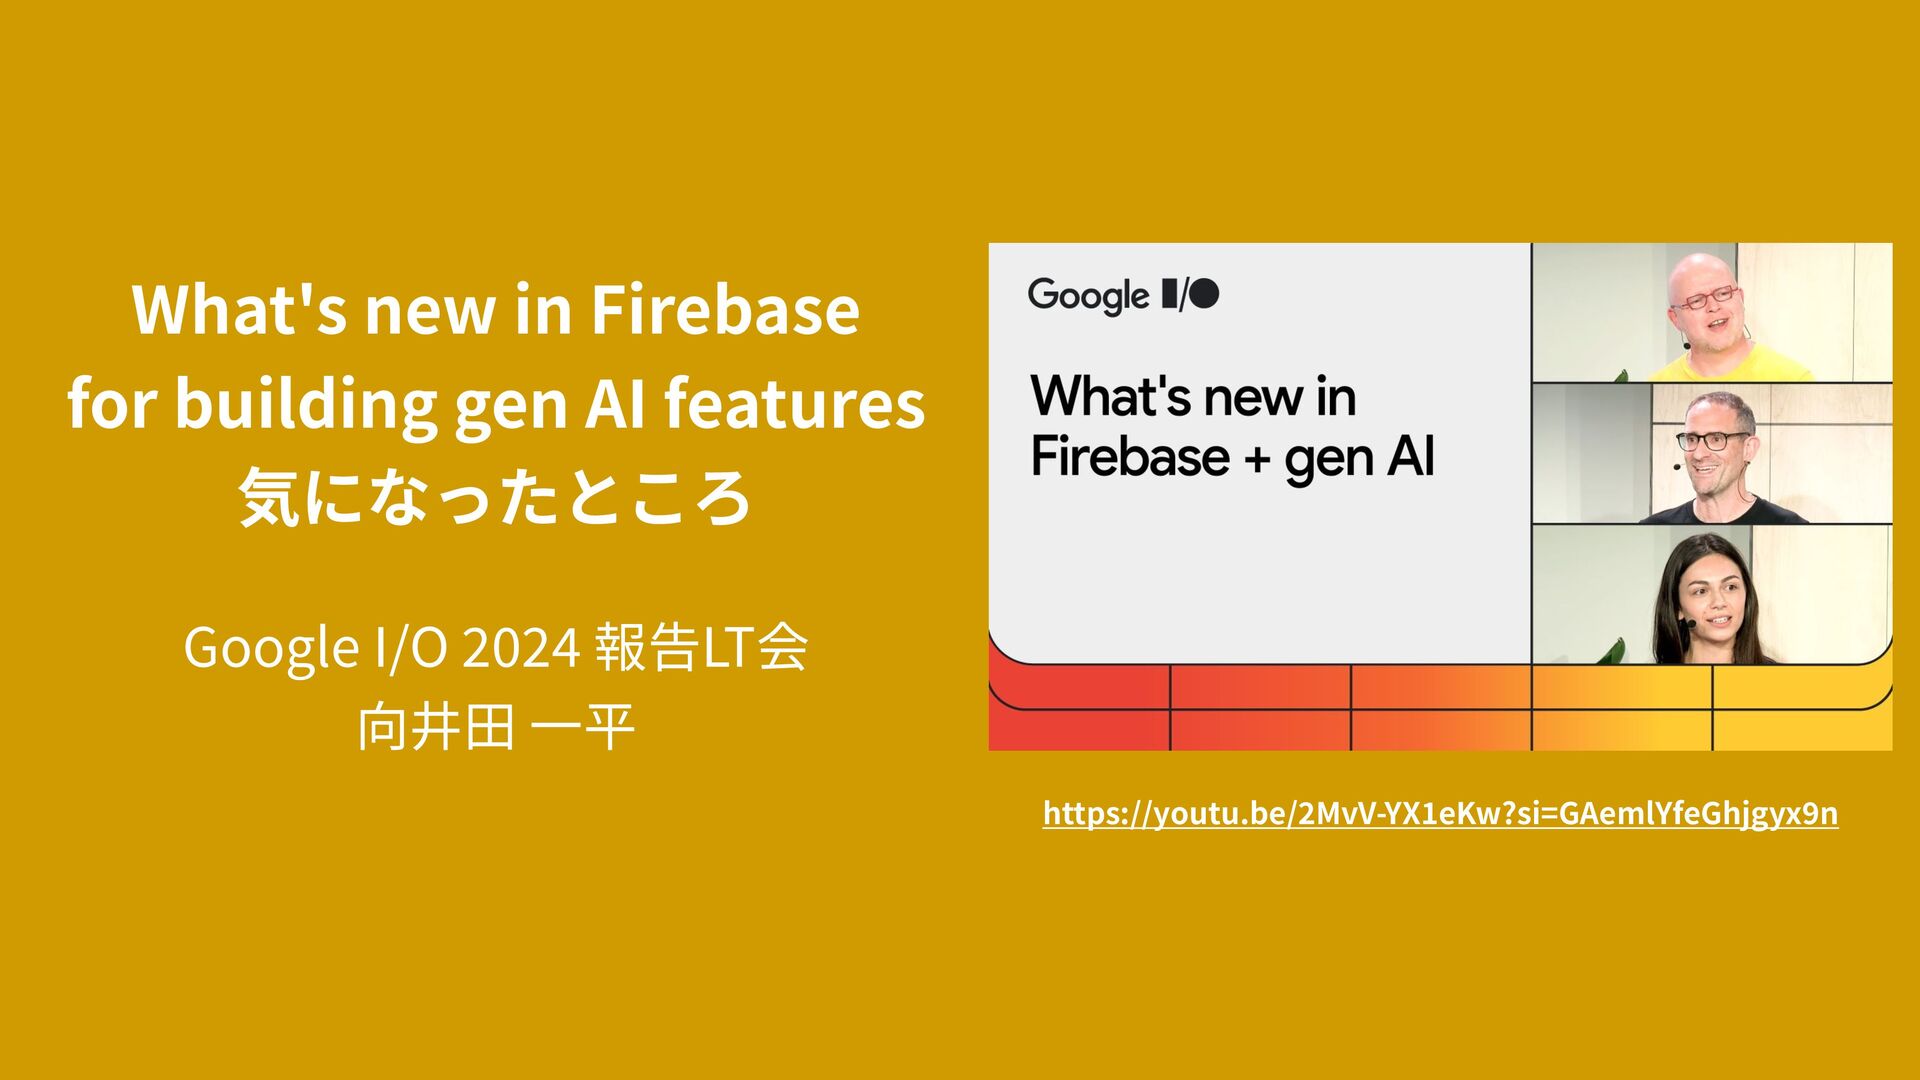 Slide Top: What's new in Firebase for building gen AI features気になったところ